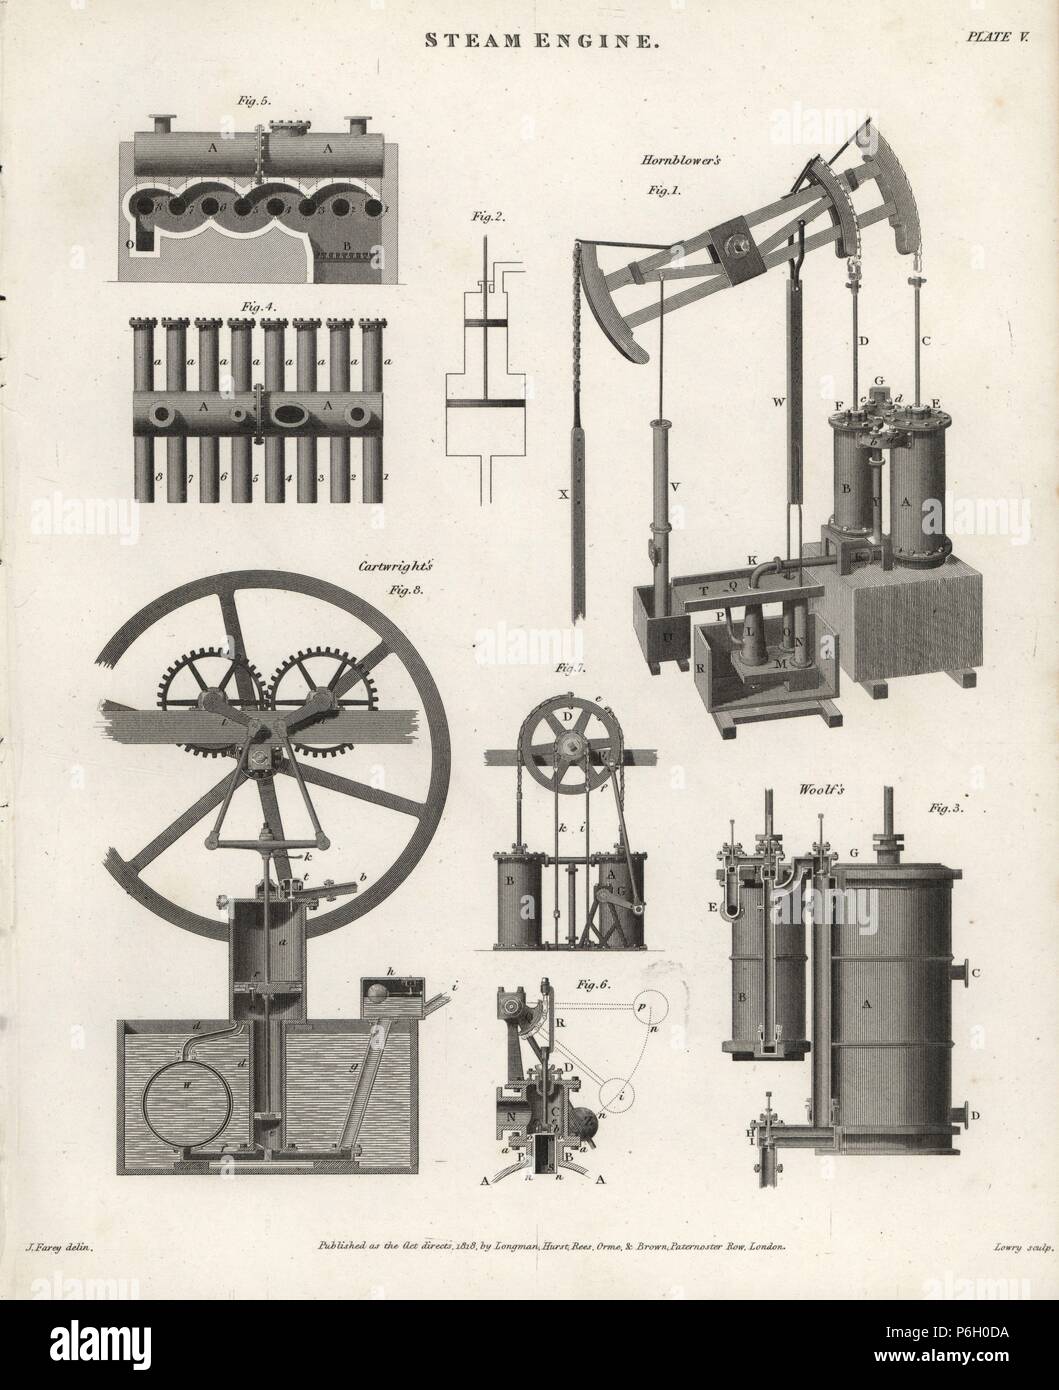 Steam engines: Jonathan Hornblower's compound steam engine, Edmund Cartwright's alcohol engine and Arthur Woolf's high-pressure compound steam engine, 18th and 19th century. Copperplate engraving by Wilson Lowry after an Illustration by J. Farey from Abraham Rees' 'Cyclopedia or Universal Dictionary,' London, 1818. Stock Photo